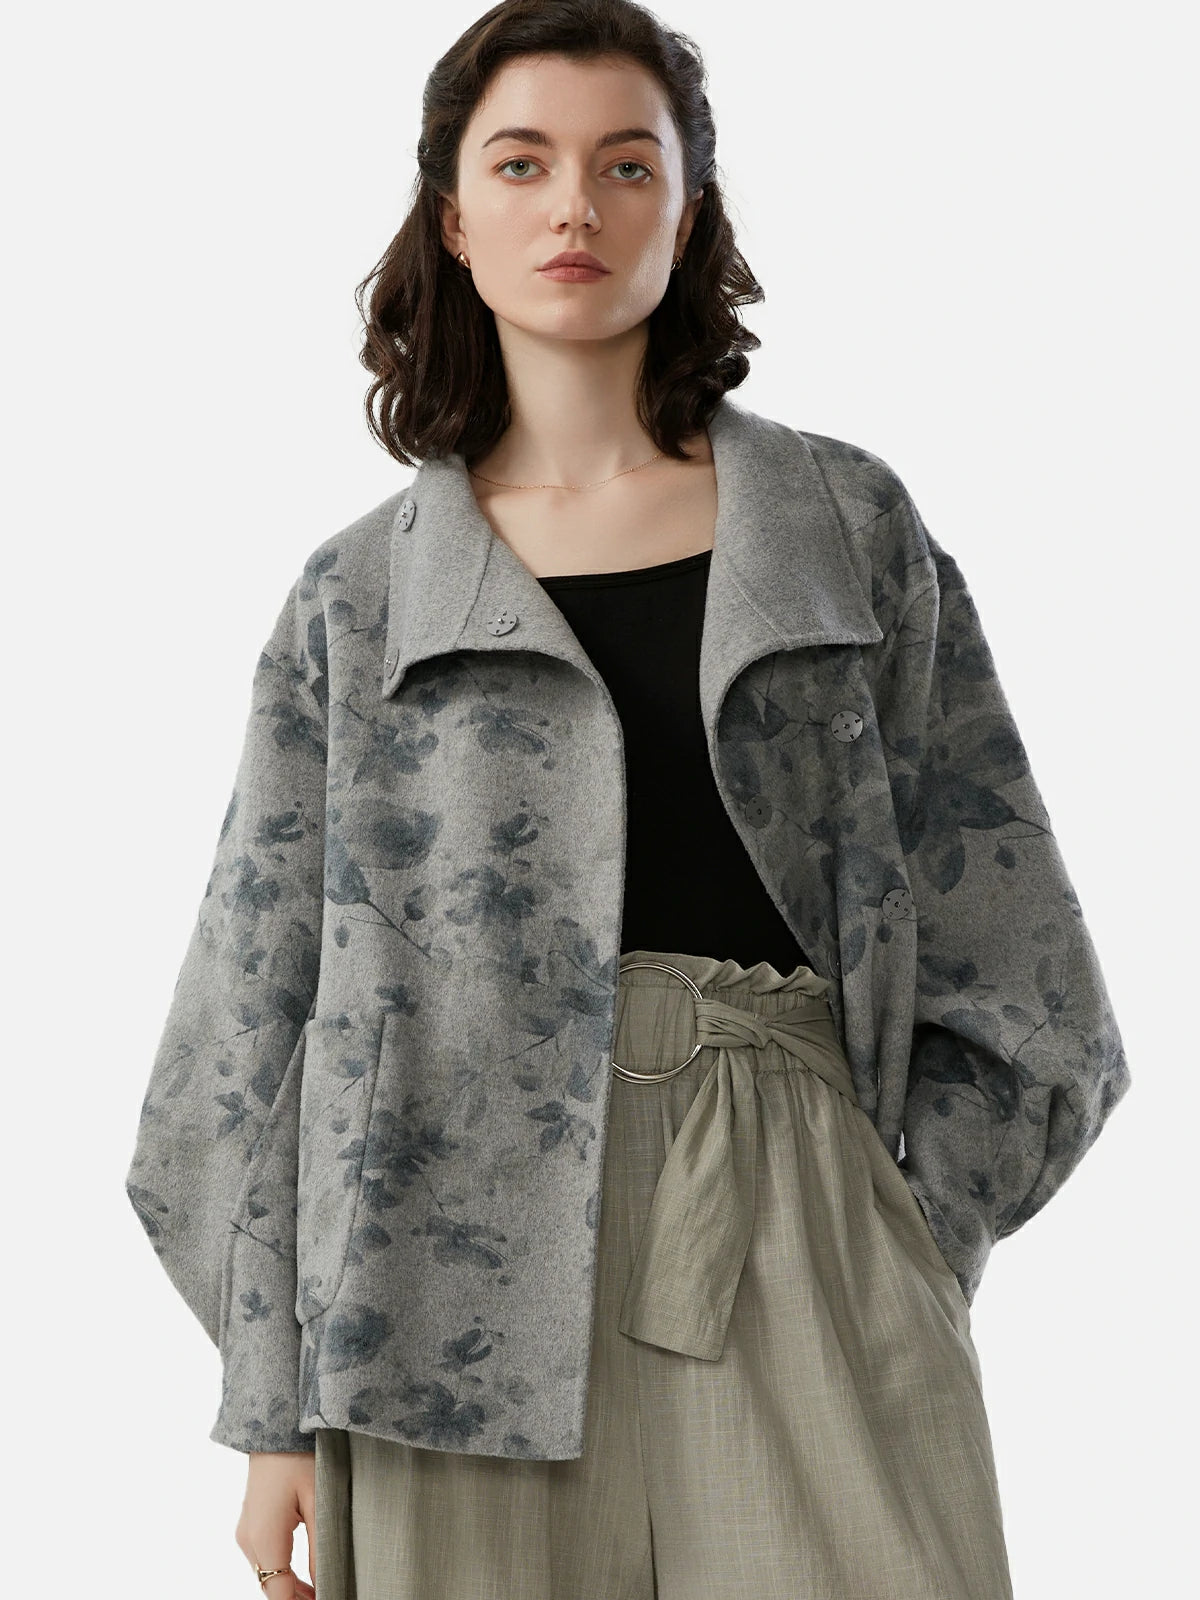 Grey printed pattern collared jacket with lantern sleeves and an accompanying belt, a fashionable women's wear